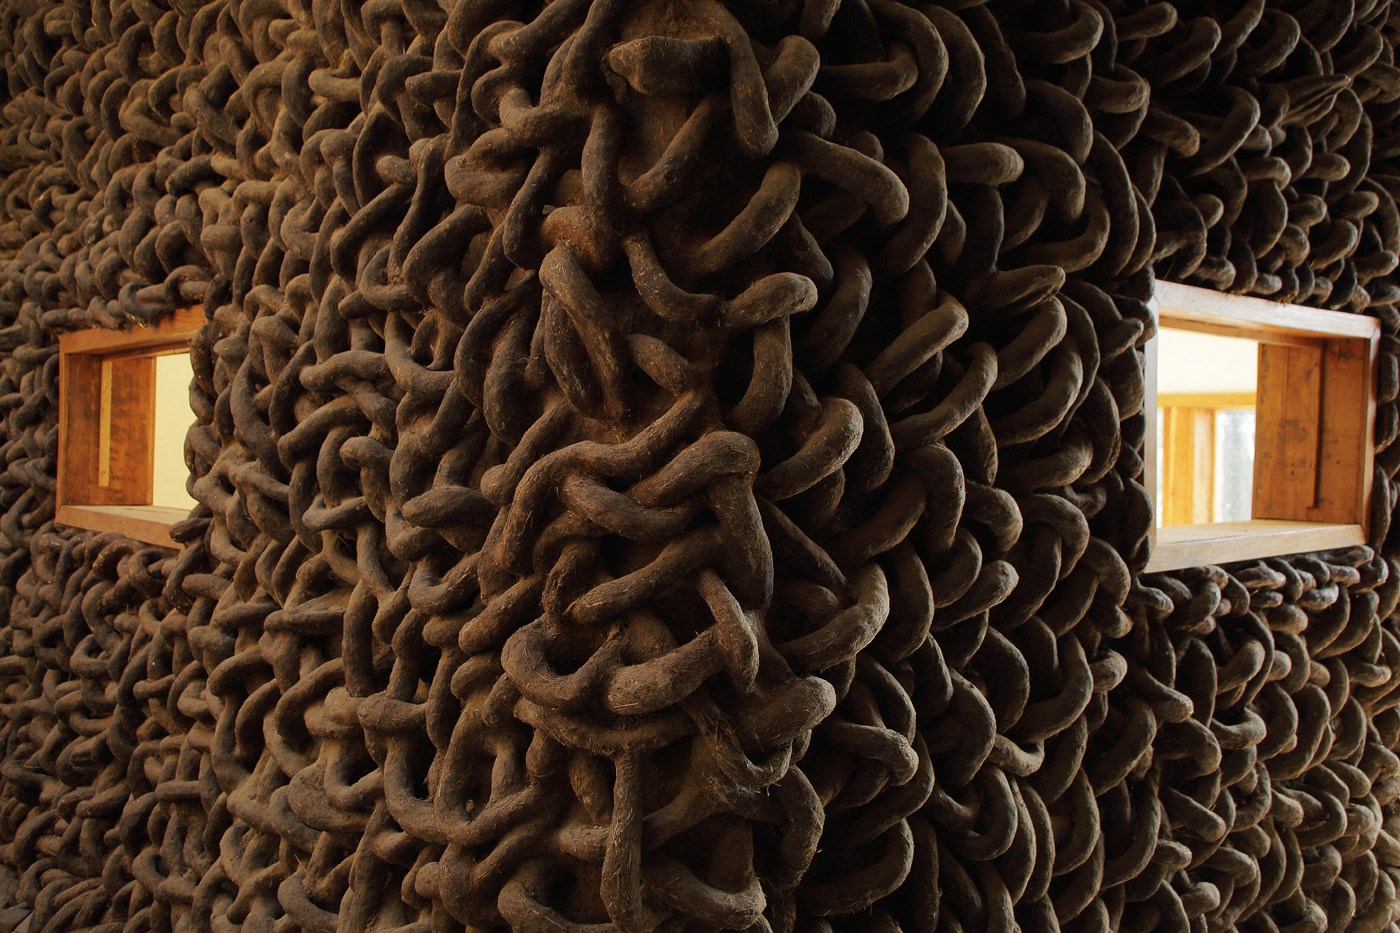 close up of wall that appears to be woven